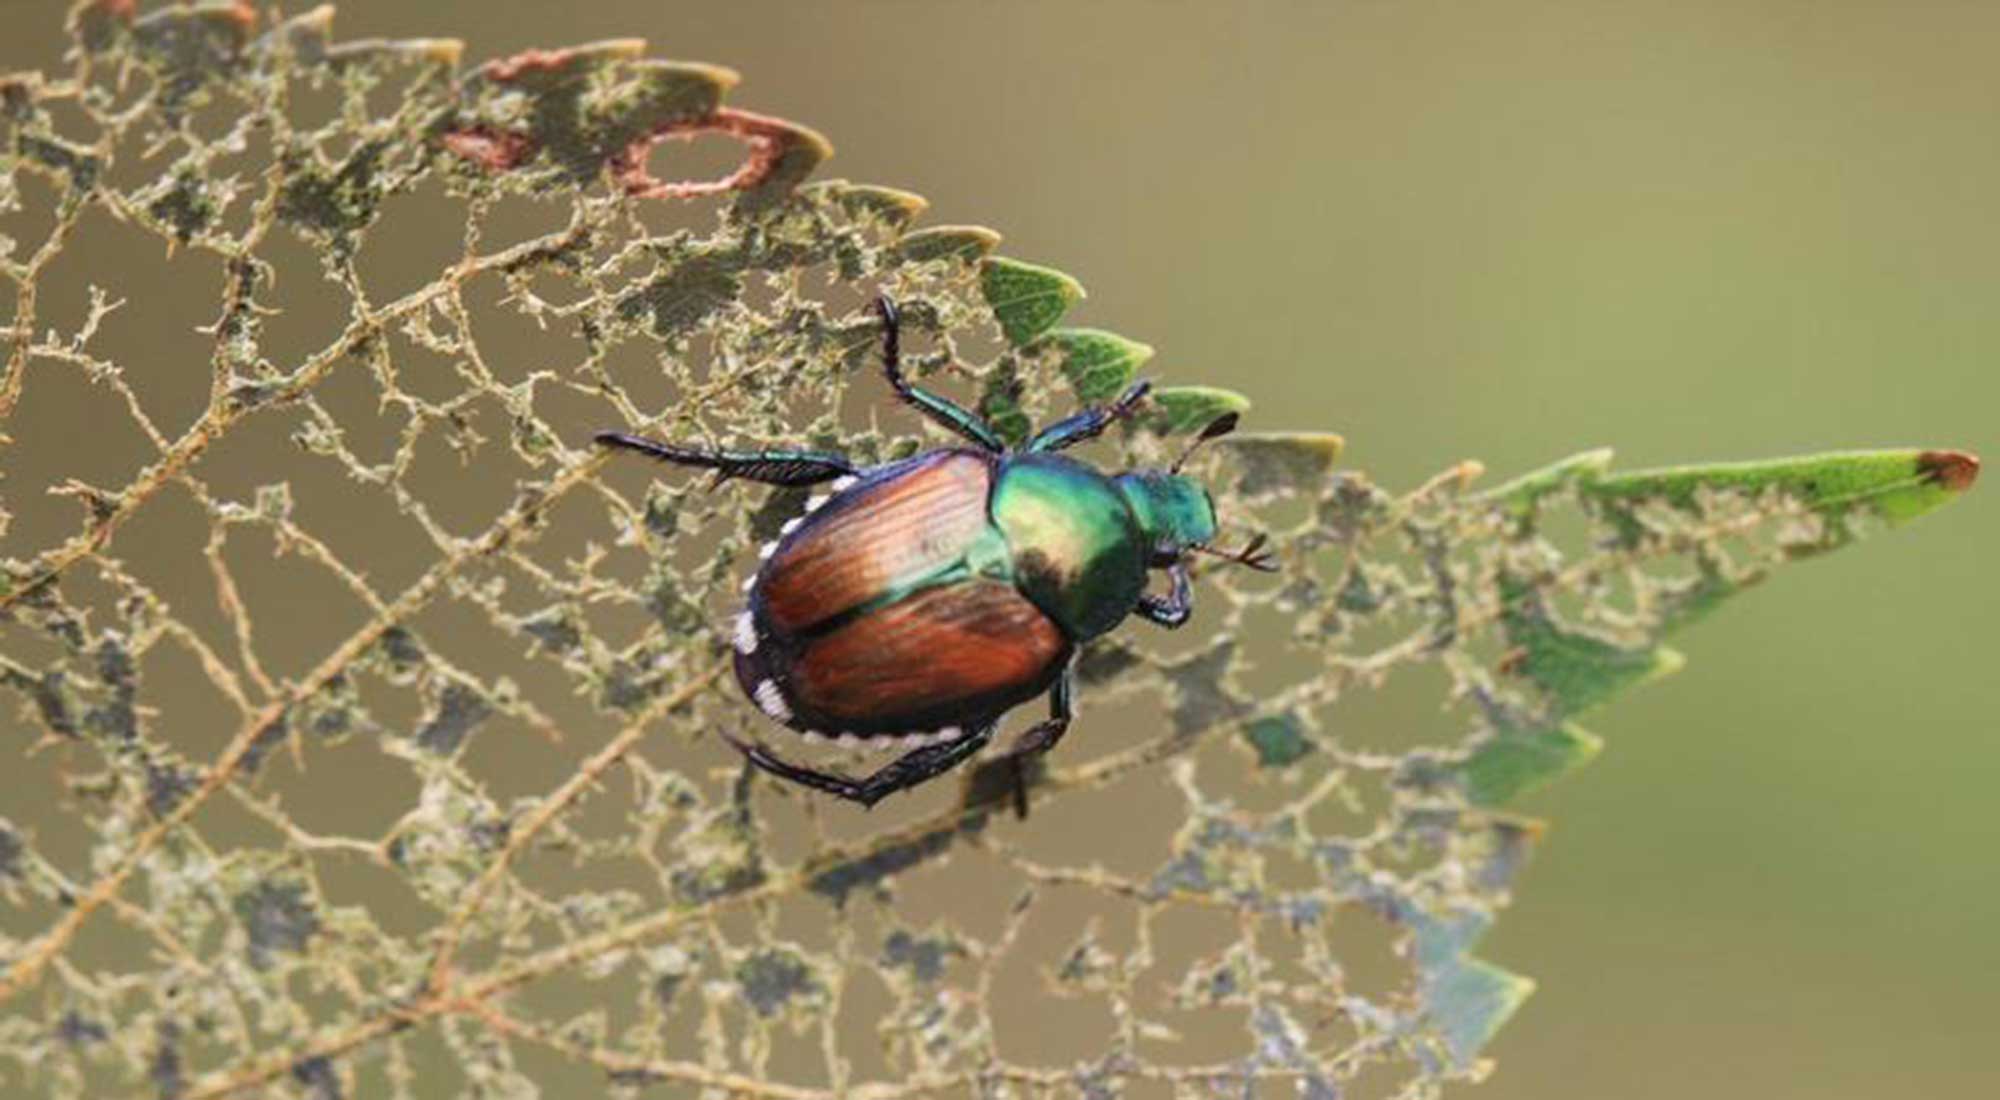 Shiny green and bronze beetle on a leaf full of holes.